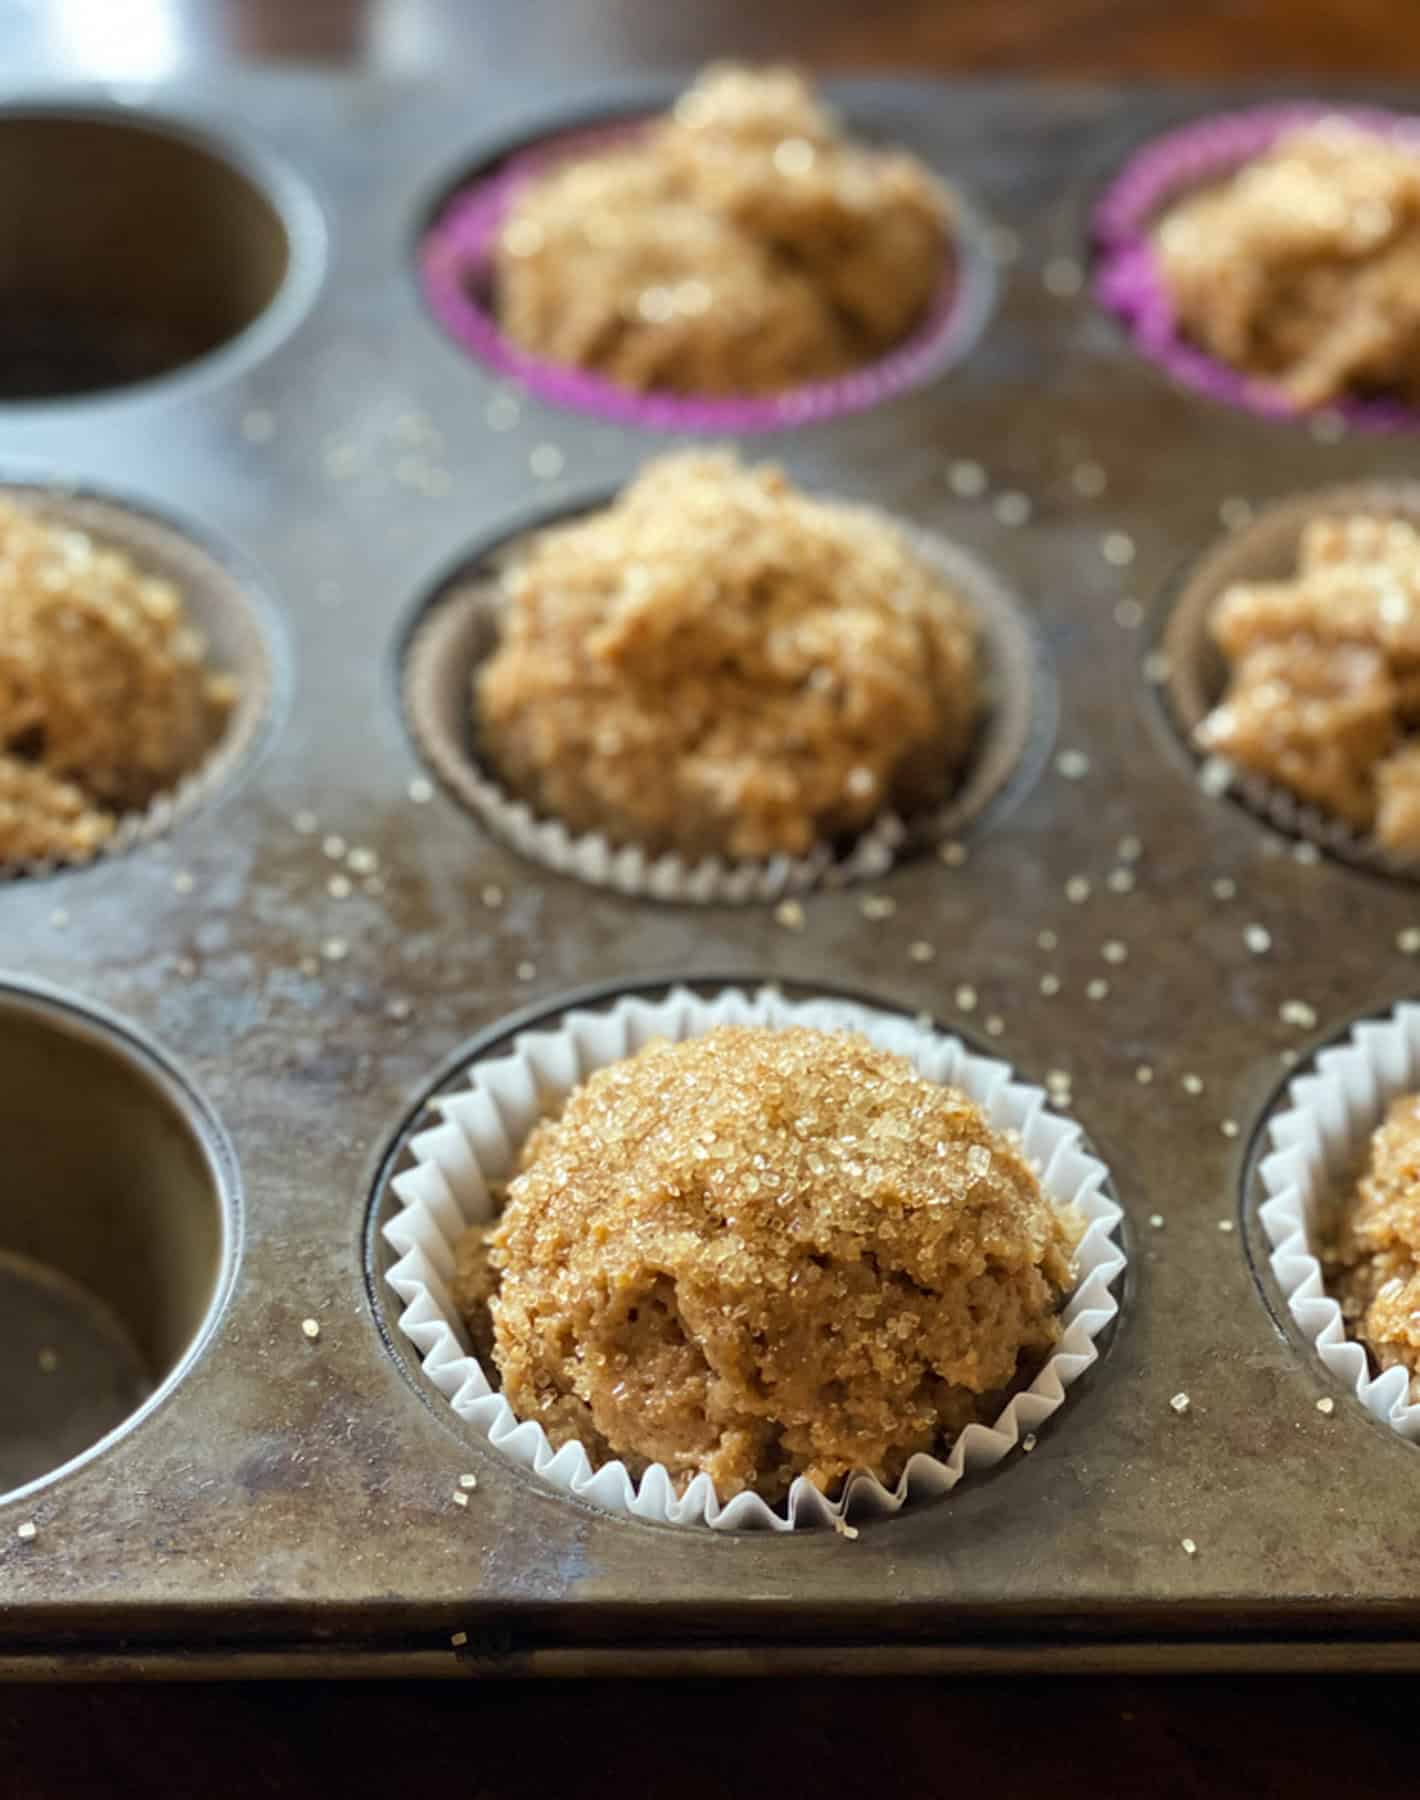 Bran muffin batter topped with turbinado sugar in a lined muffin pan.